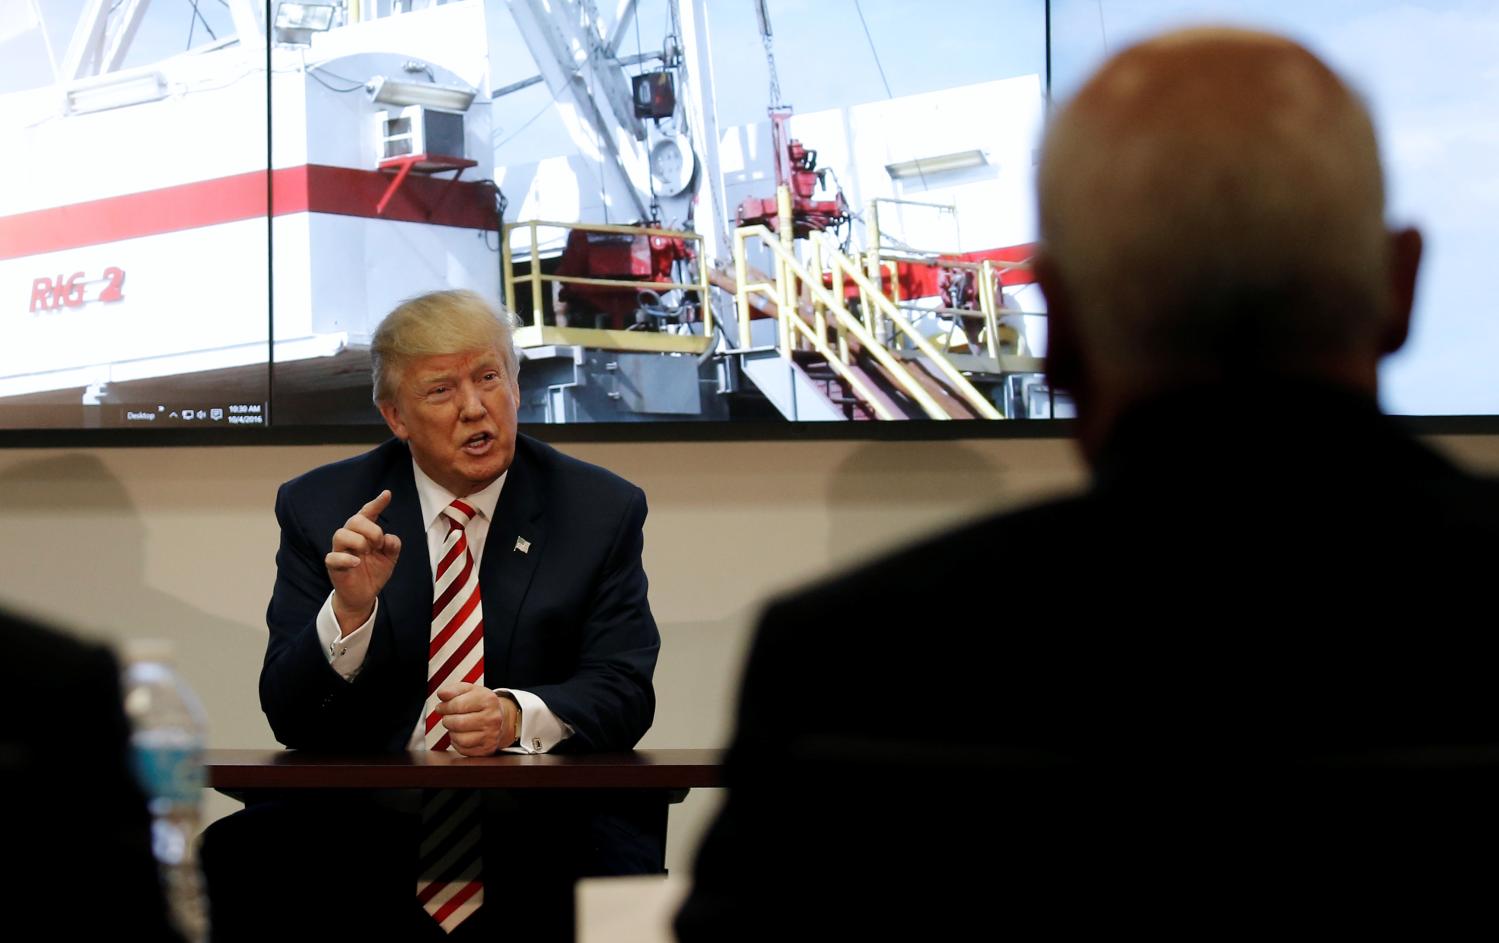 Then-U.S. Republican presidential nominee Donald Trump meets with energy executives during a campaign stop in Denver, Colorado.